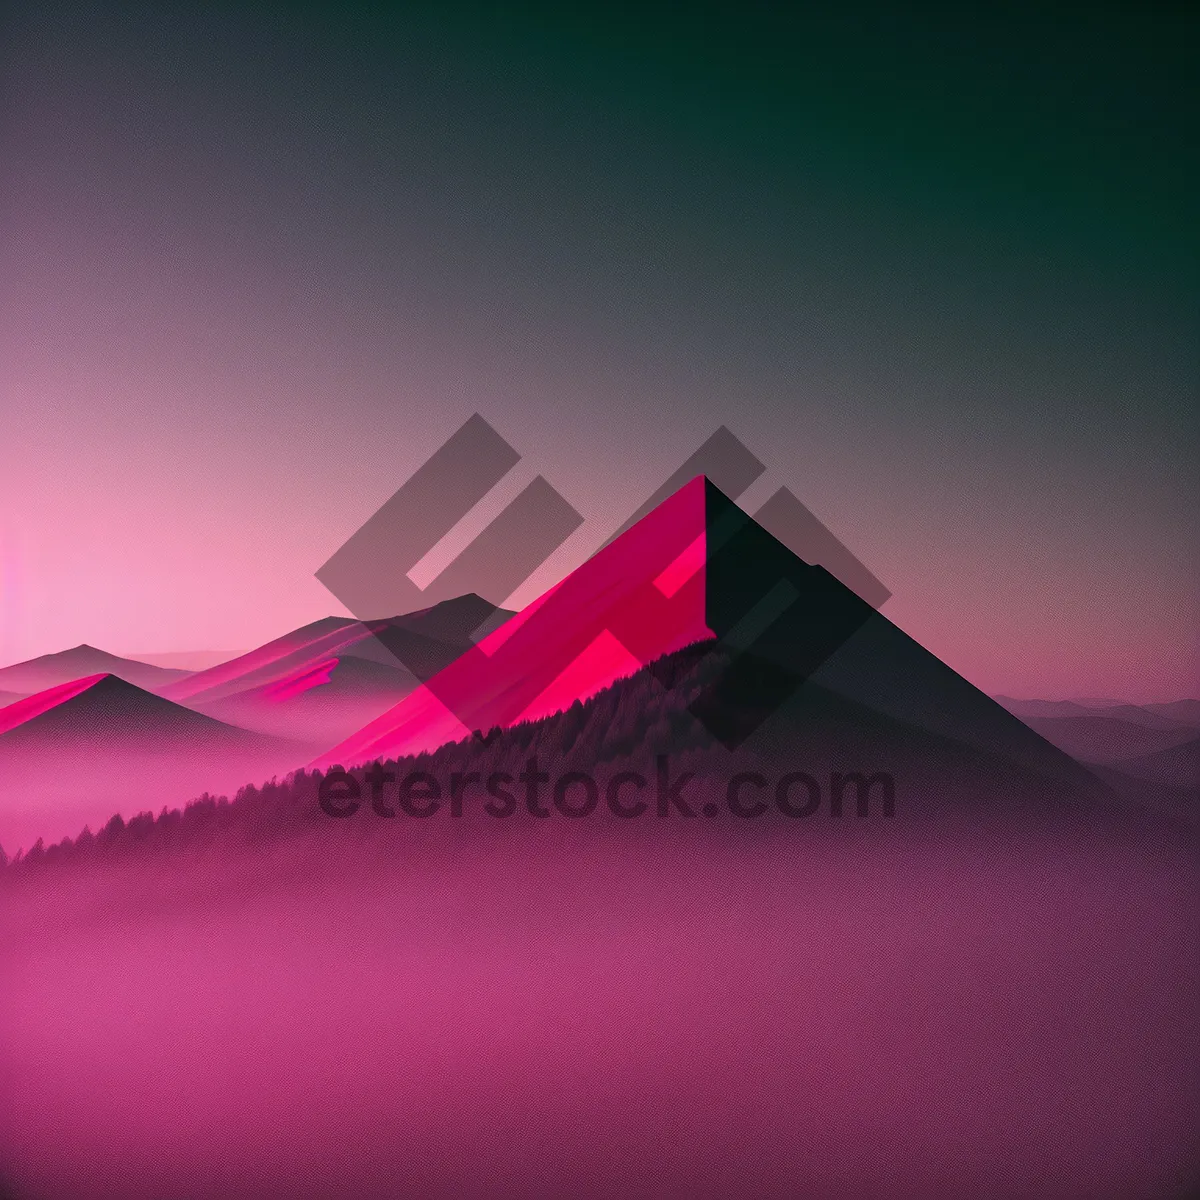 Picture of Pyramid Art: Captivating Graphic Design with Sunlit Shapes